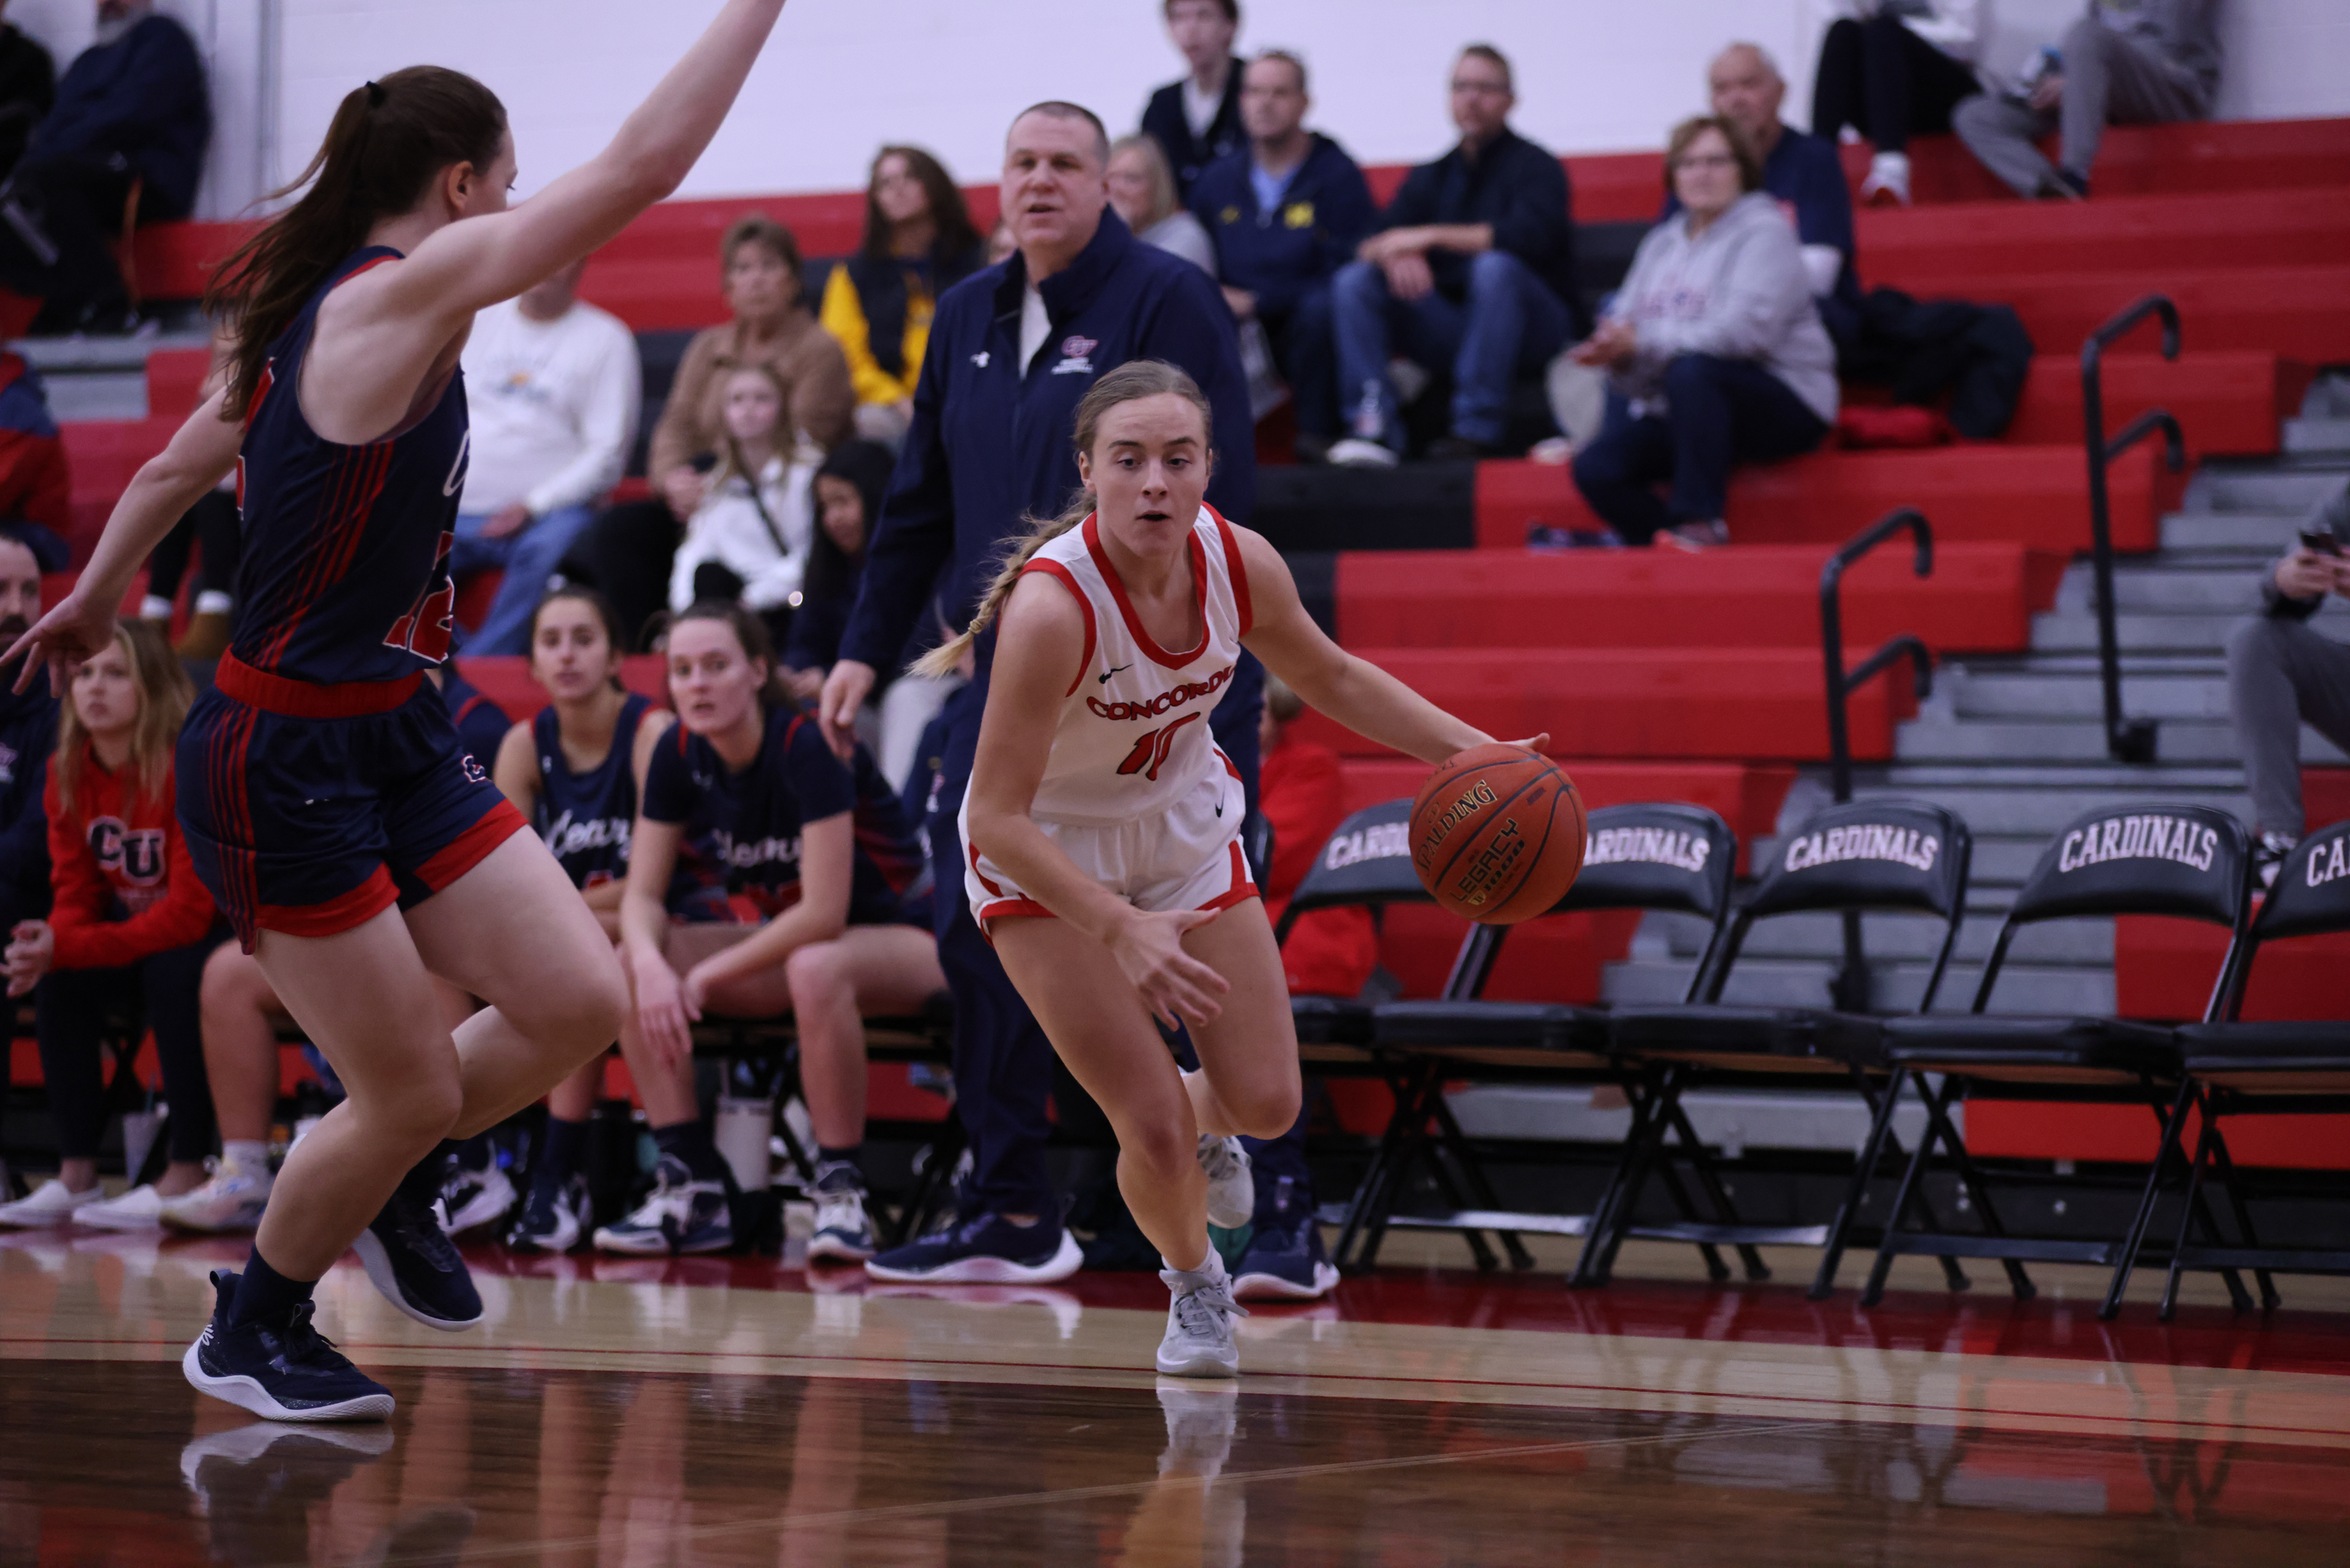 Women's Basketball cruises past Cleary 83-52